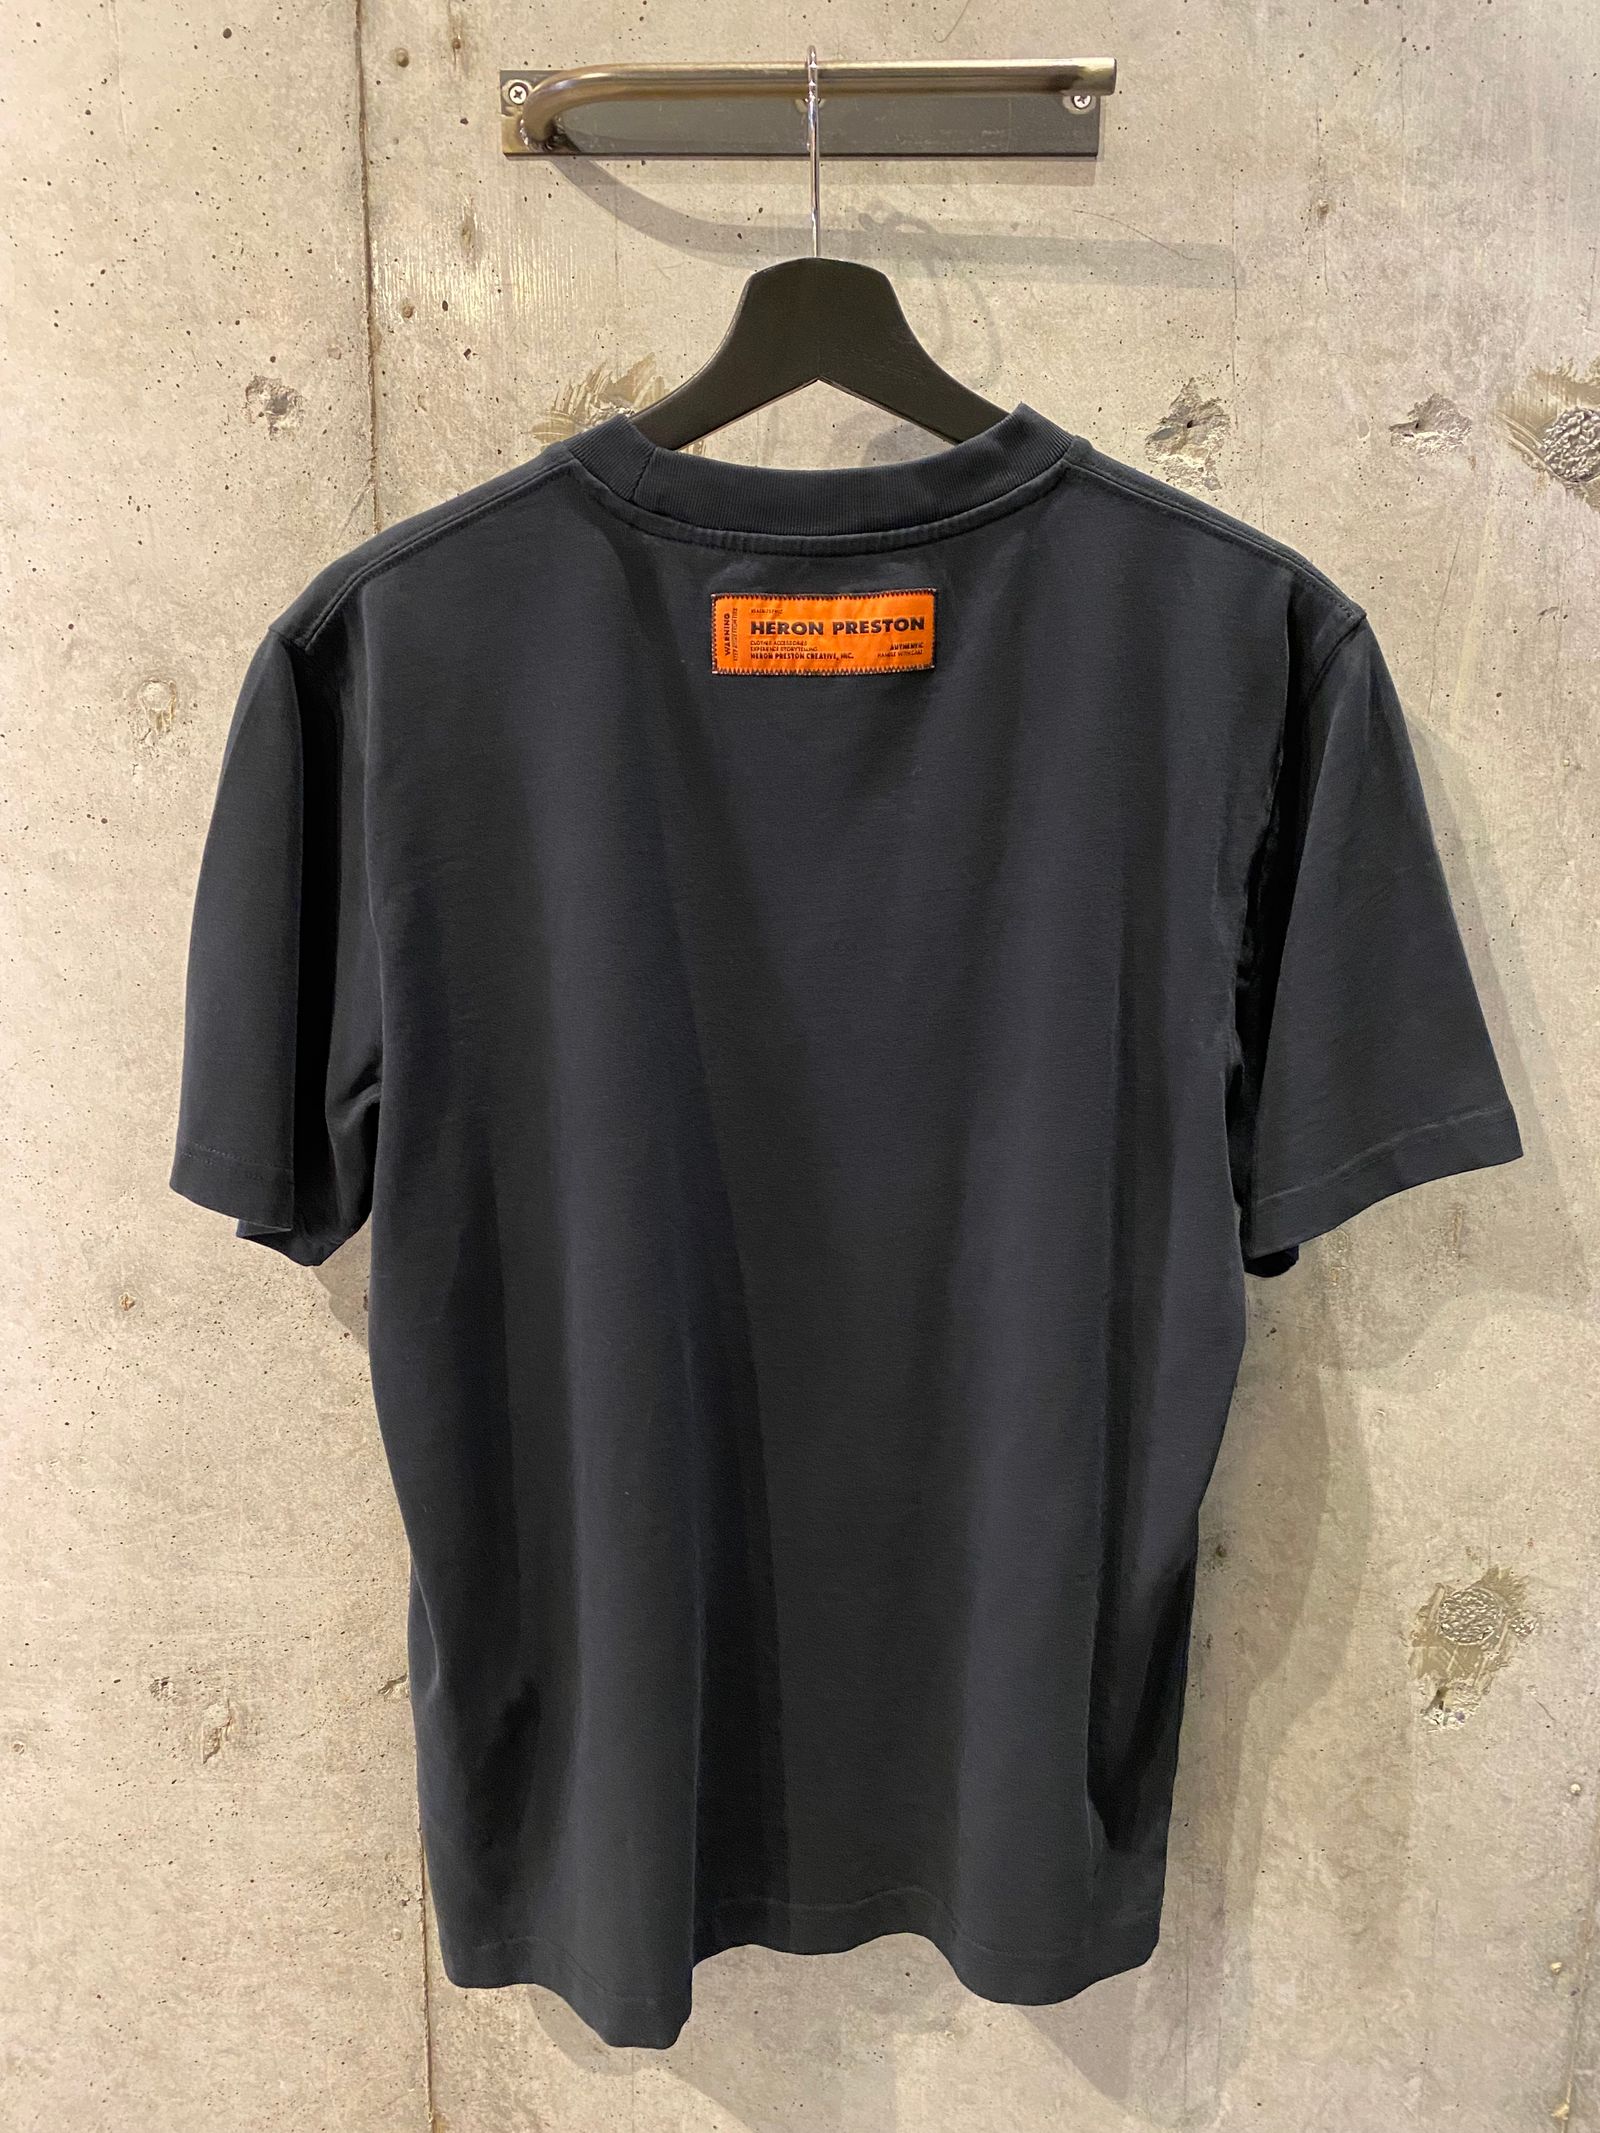 HERON PRESTON - HPNY Tシャツ/black | R and another stories